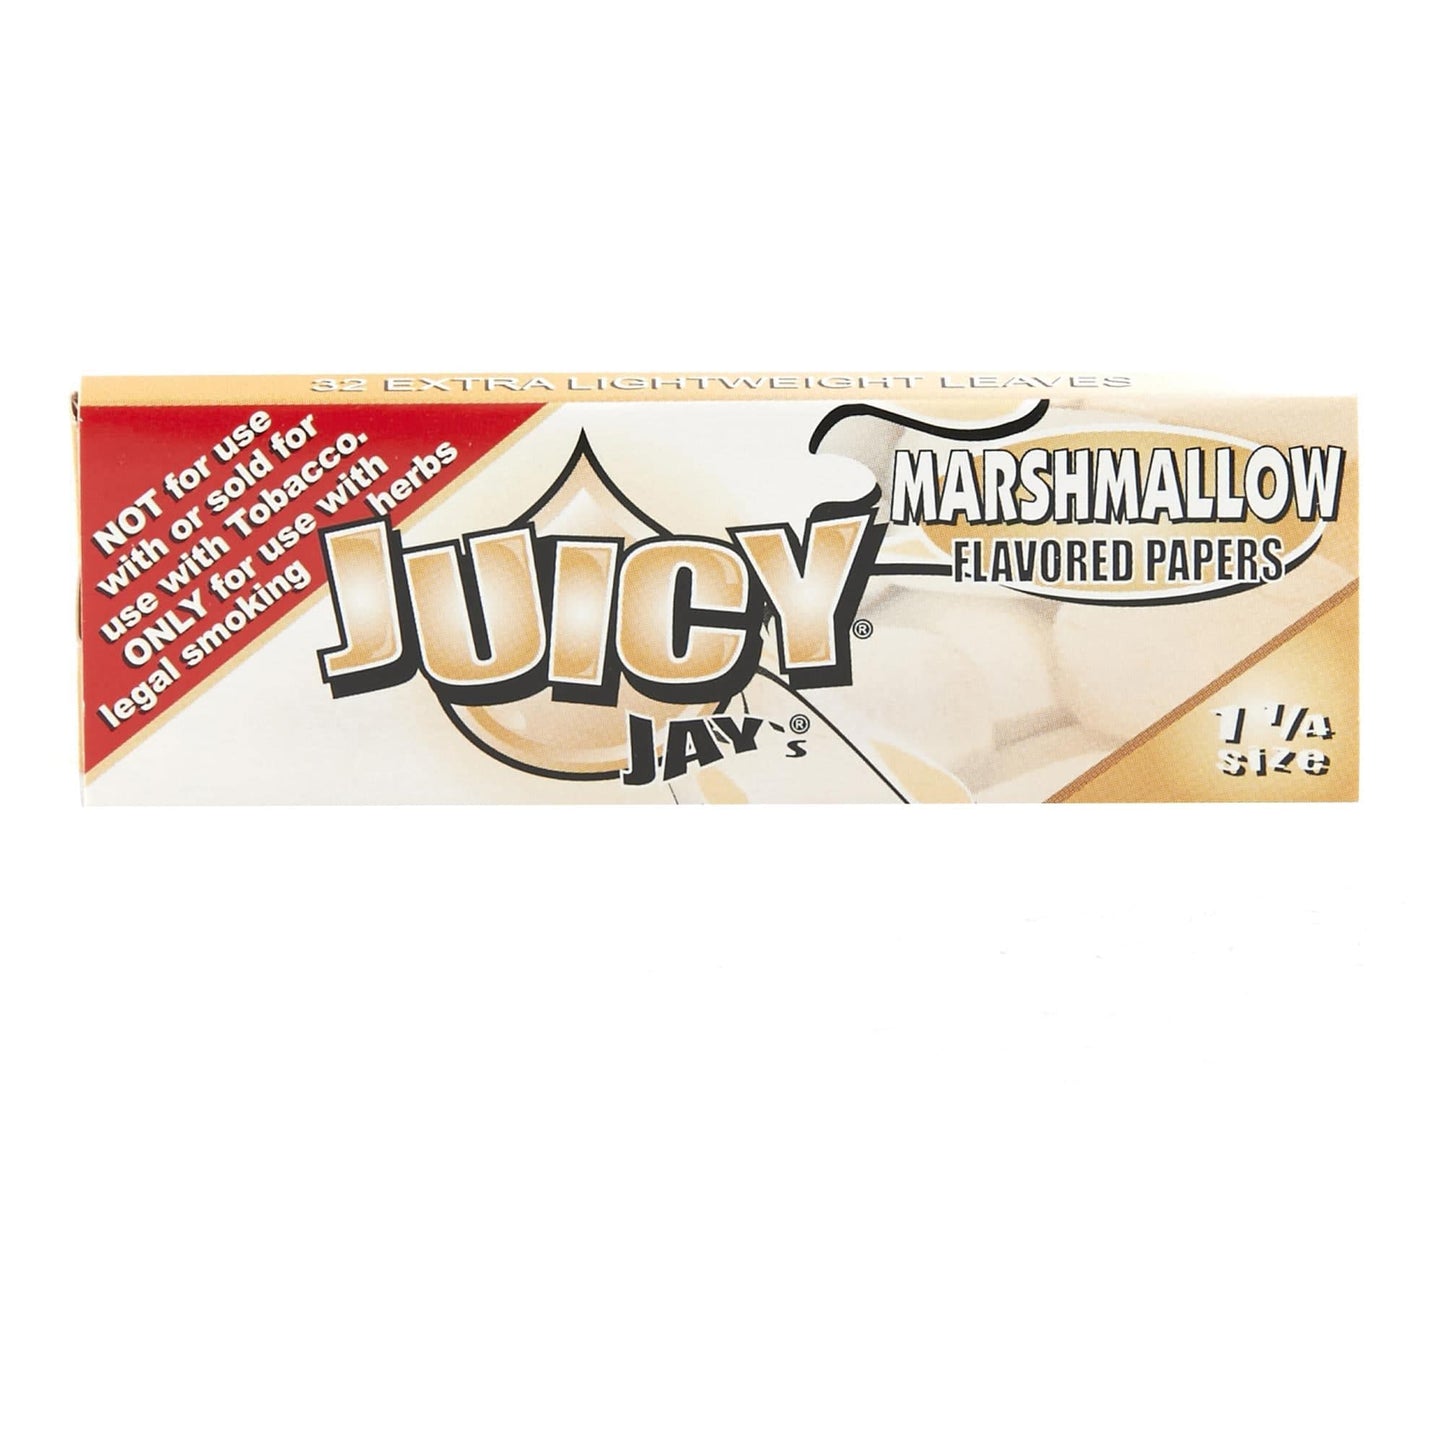 Juicy Jay's Rolling Papers Marshmallow Juicy Jay Rolling Papers Box of 24